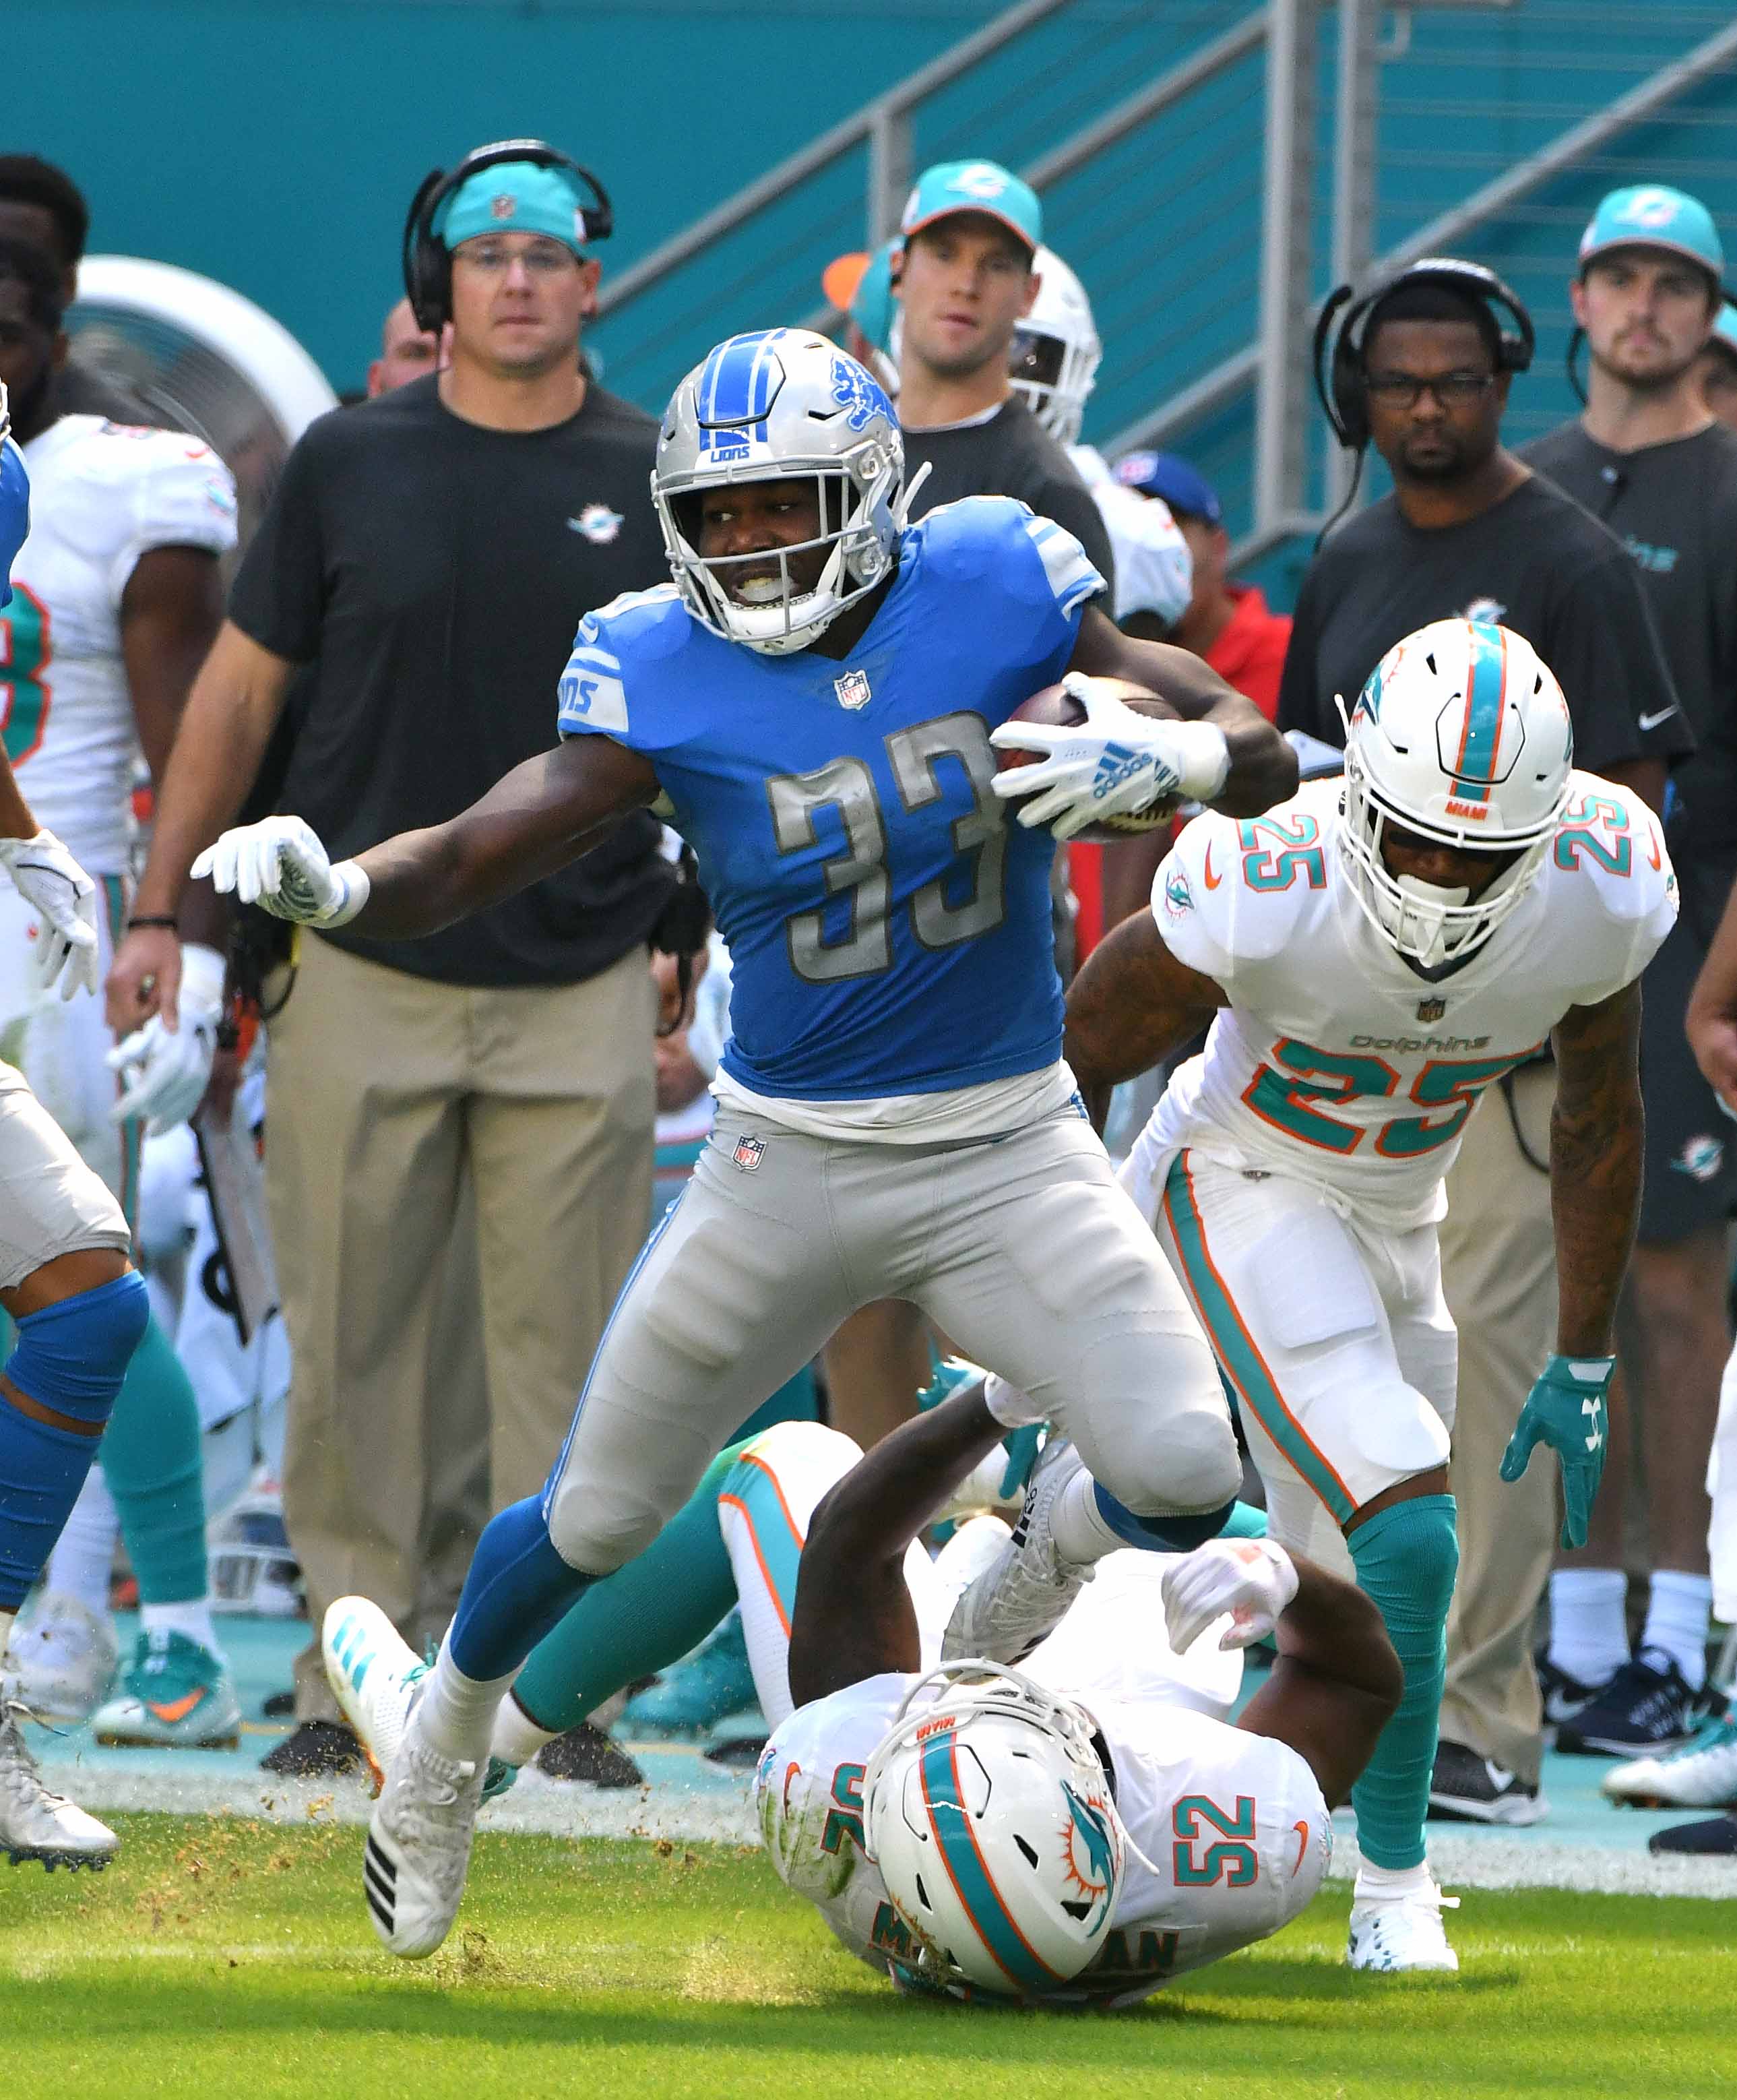 Lions running back Kerryon Johnson runs for a long first down past a pair of Dolphins defenders in the first quarter of Sunday's win in Miami.